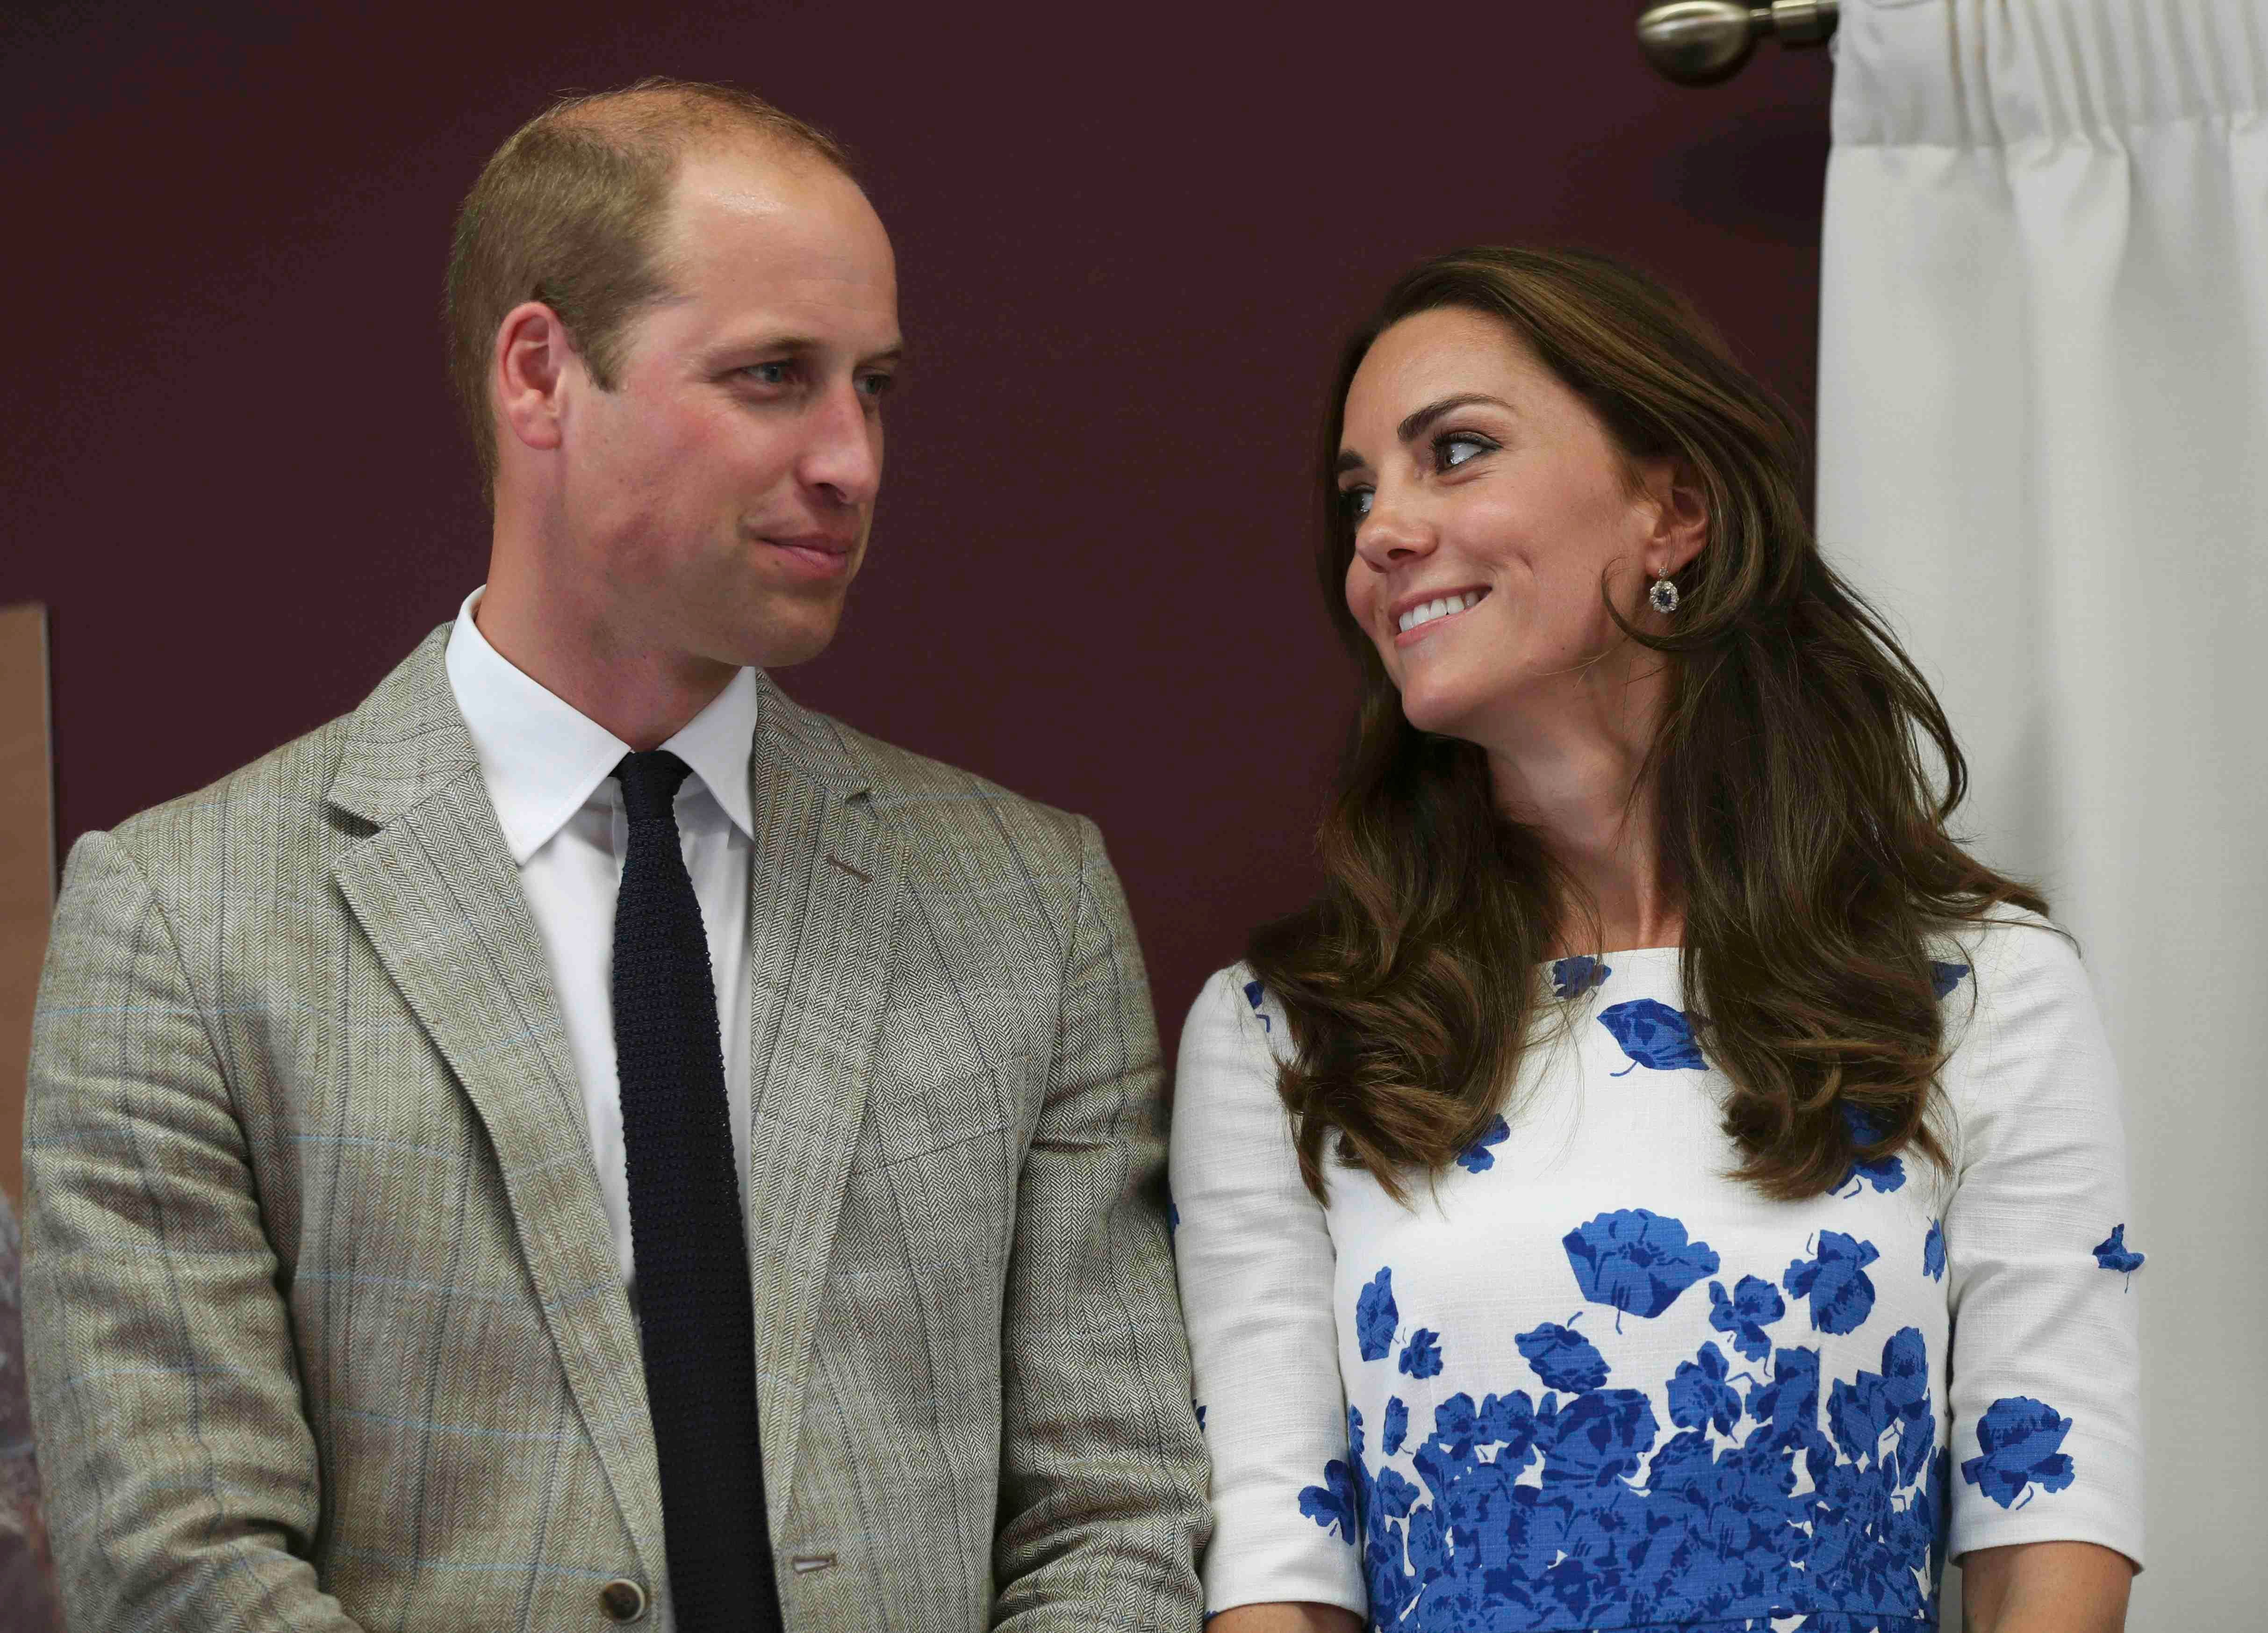 Prince William and Kate Middleton during their visit to Keech Hospice Care on August 24, 2016. | Photo: Getty Images 